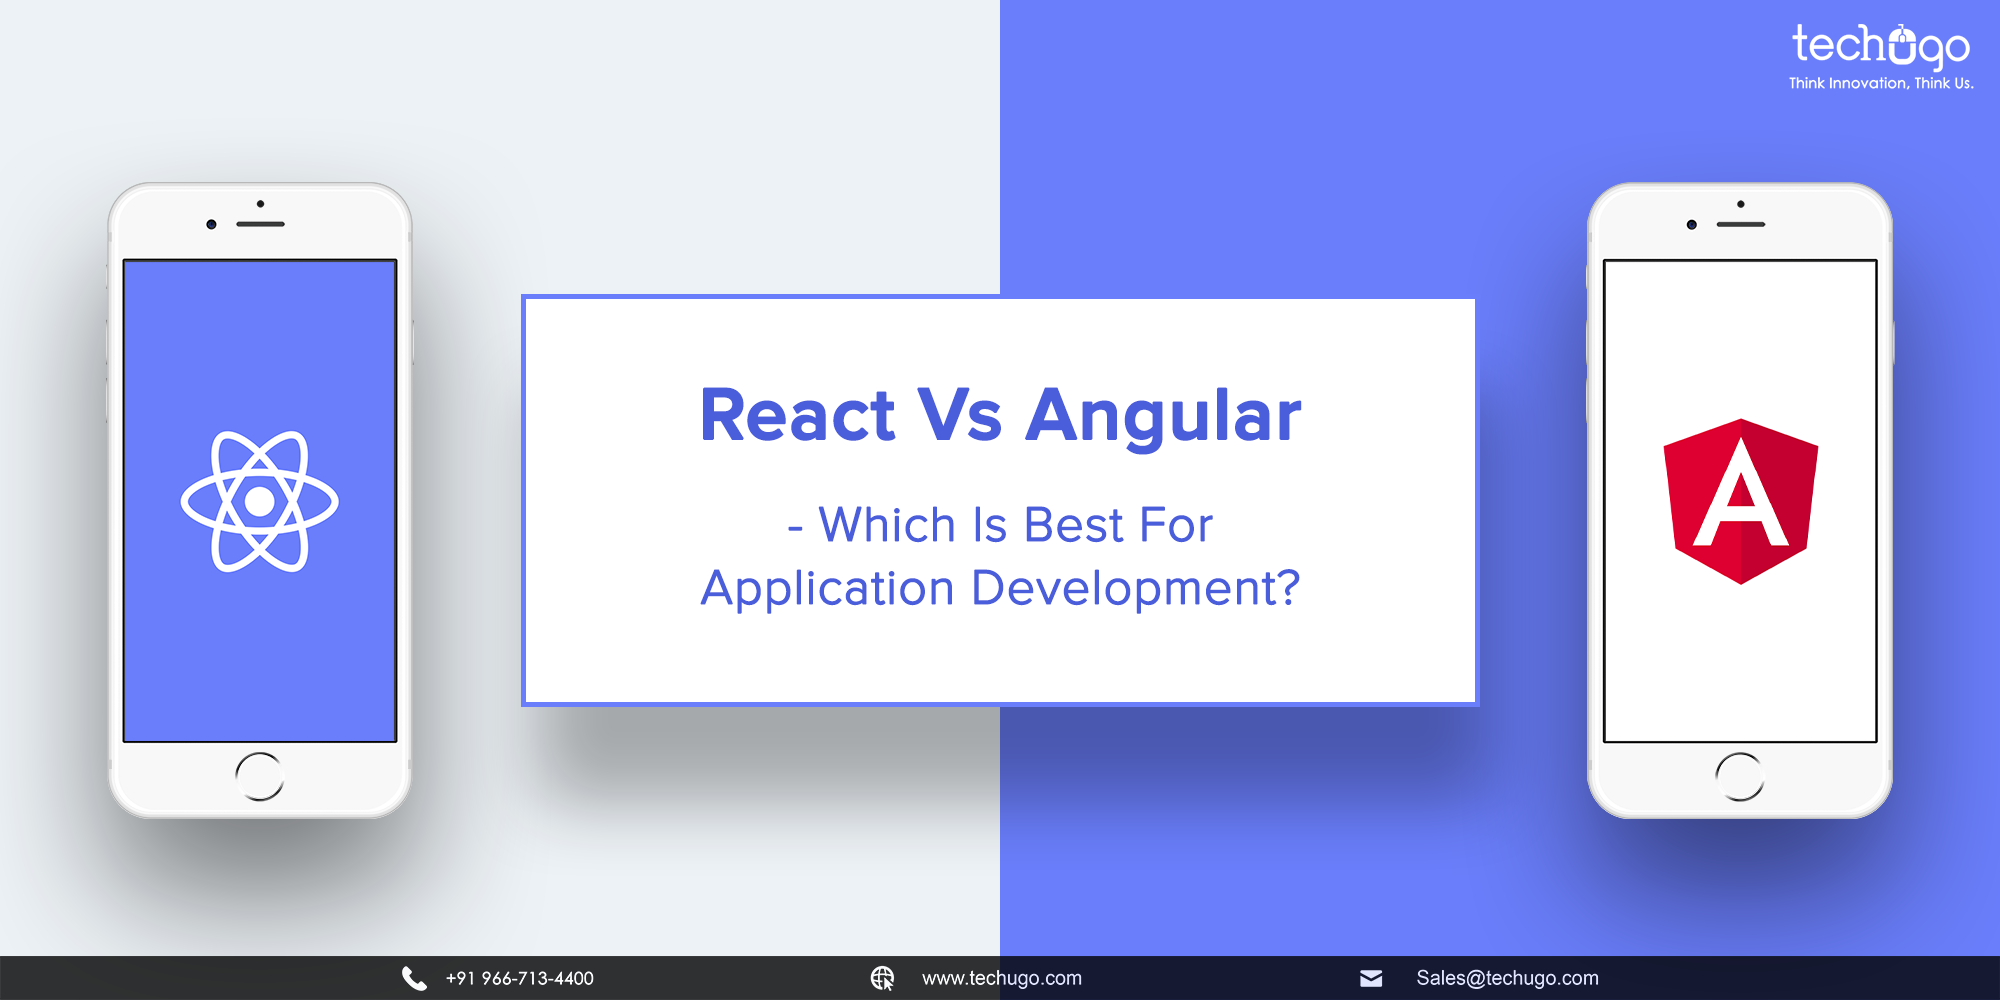 React Vs Angular- Which Is Best For Application Development?